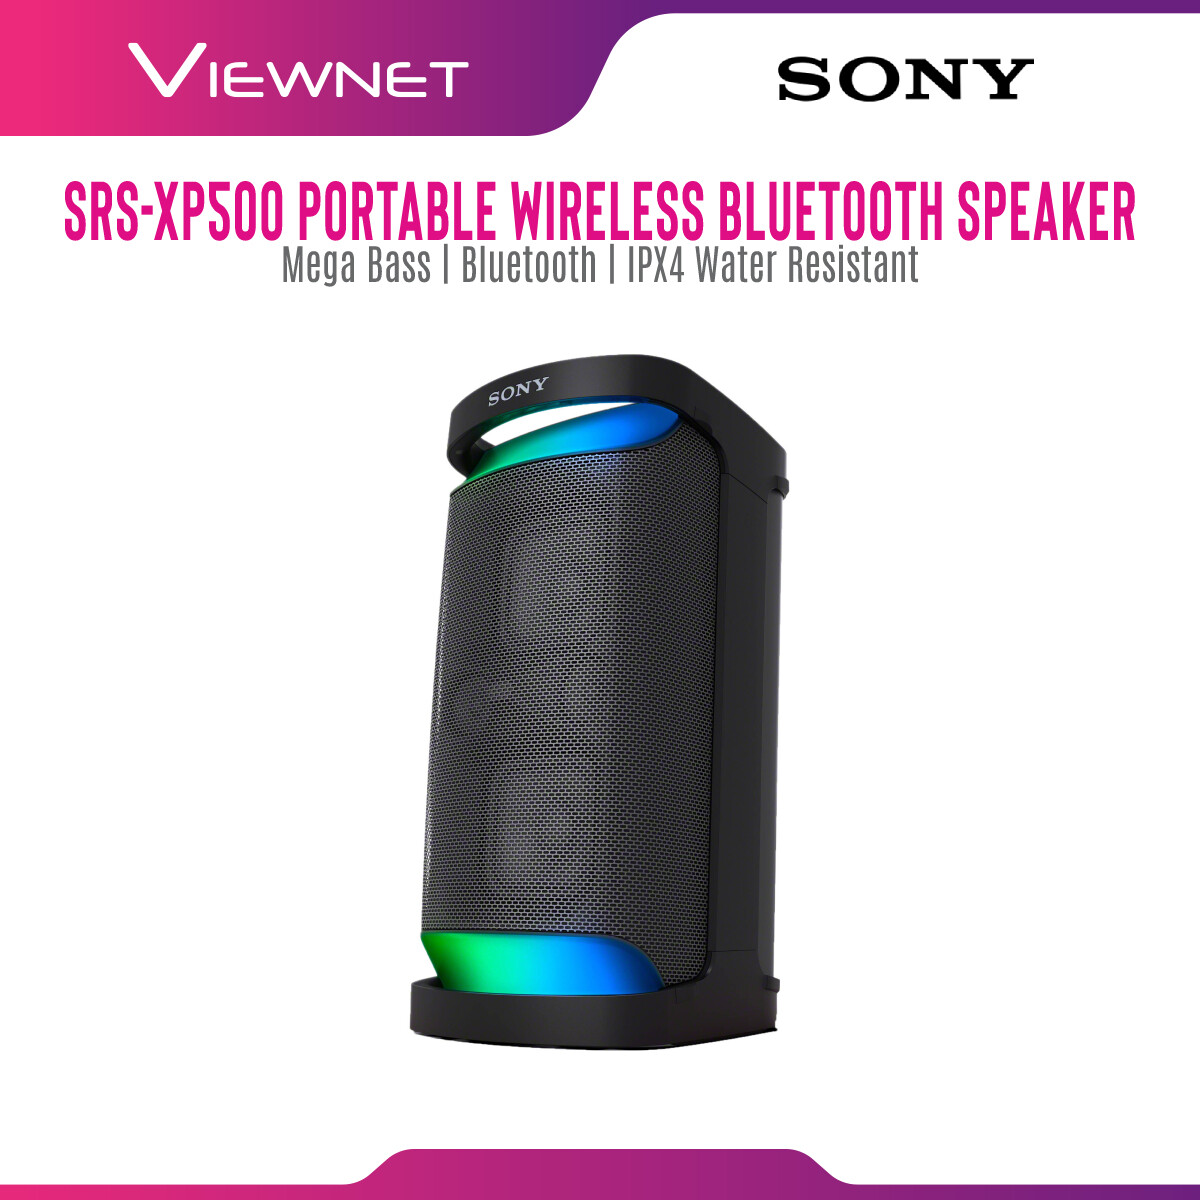 [PRE-ORDER] [NEW LAUNCH] Sony SRS-XP500 Series Portable Wireless Bluetooth Speaker with Extra Bass , IPX Water Resistant + (Free Gifts: F-V120 Microphone + RM50 Starbucks Card(While Stock Last ) (ETA: 2021-08-04)